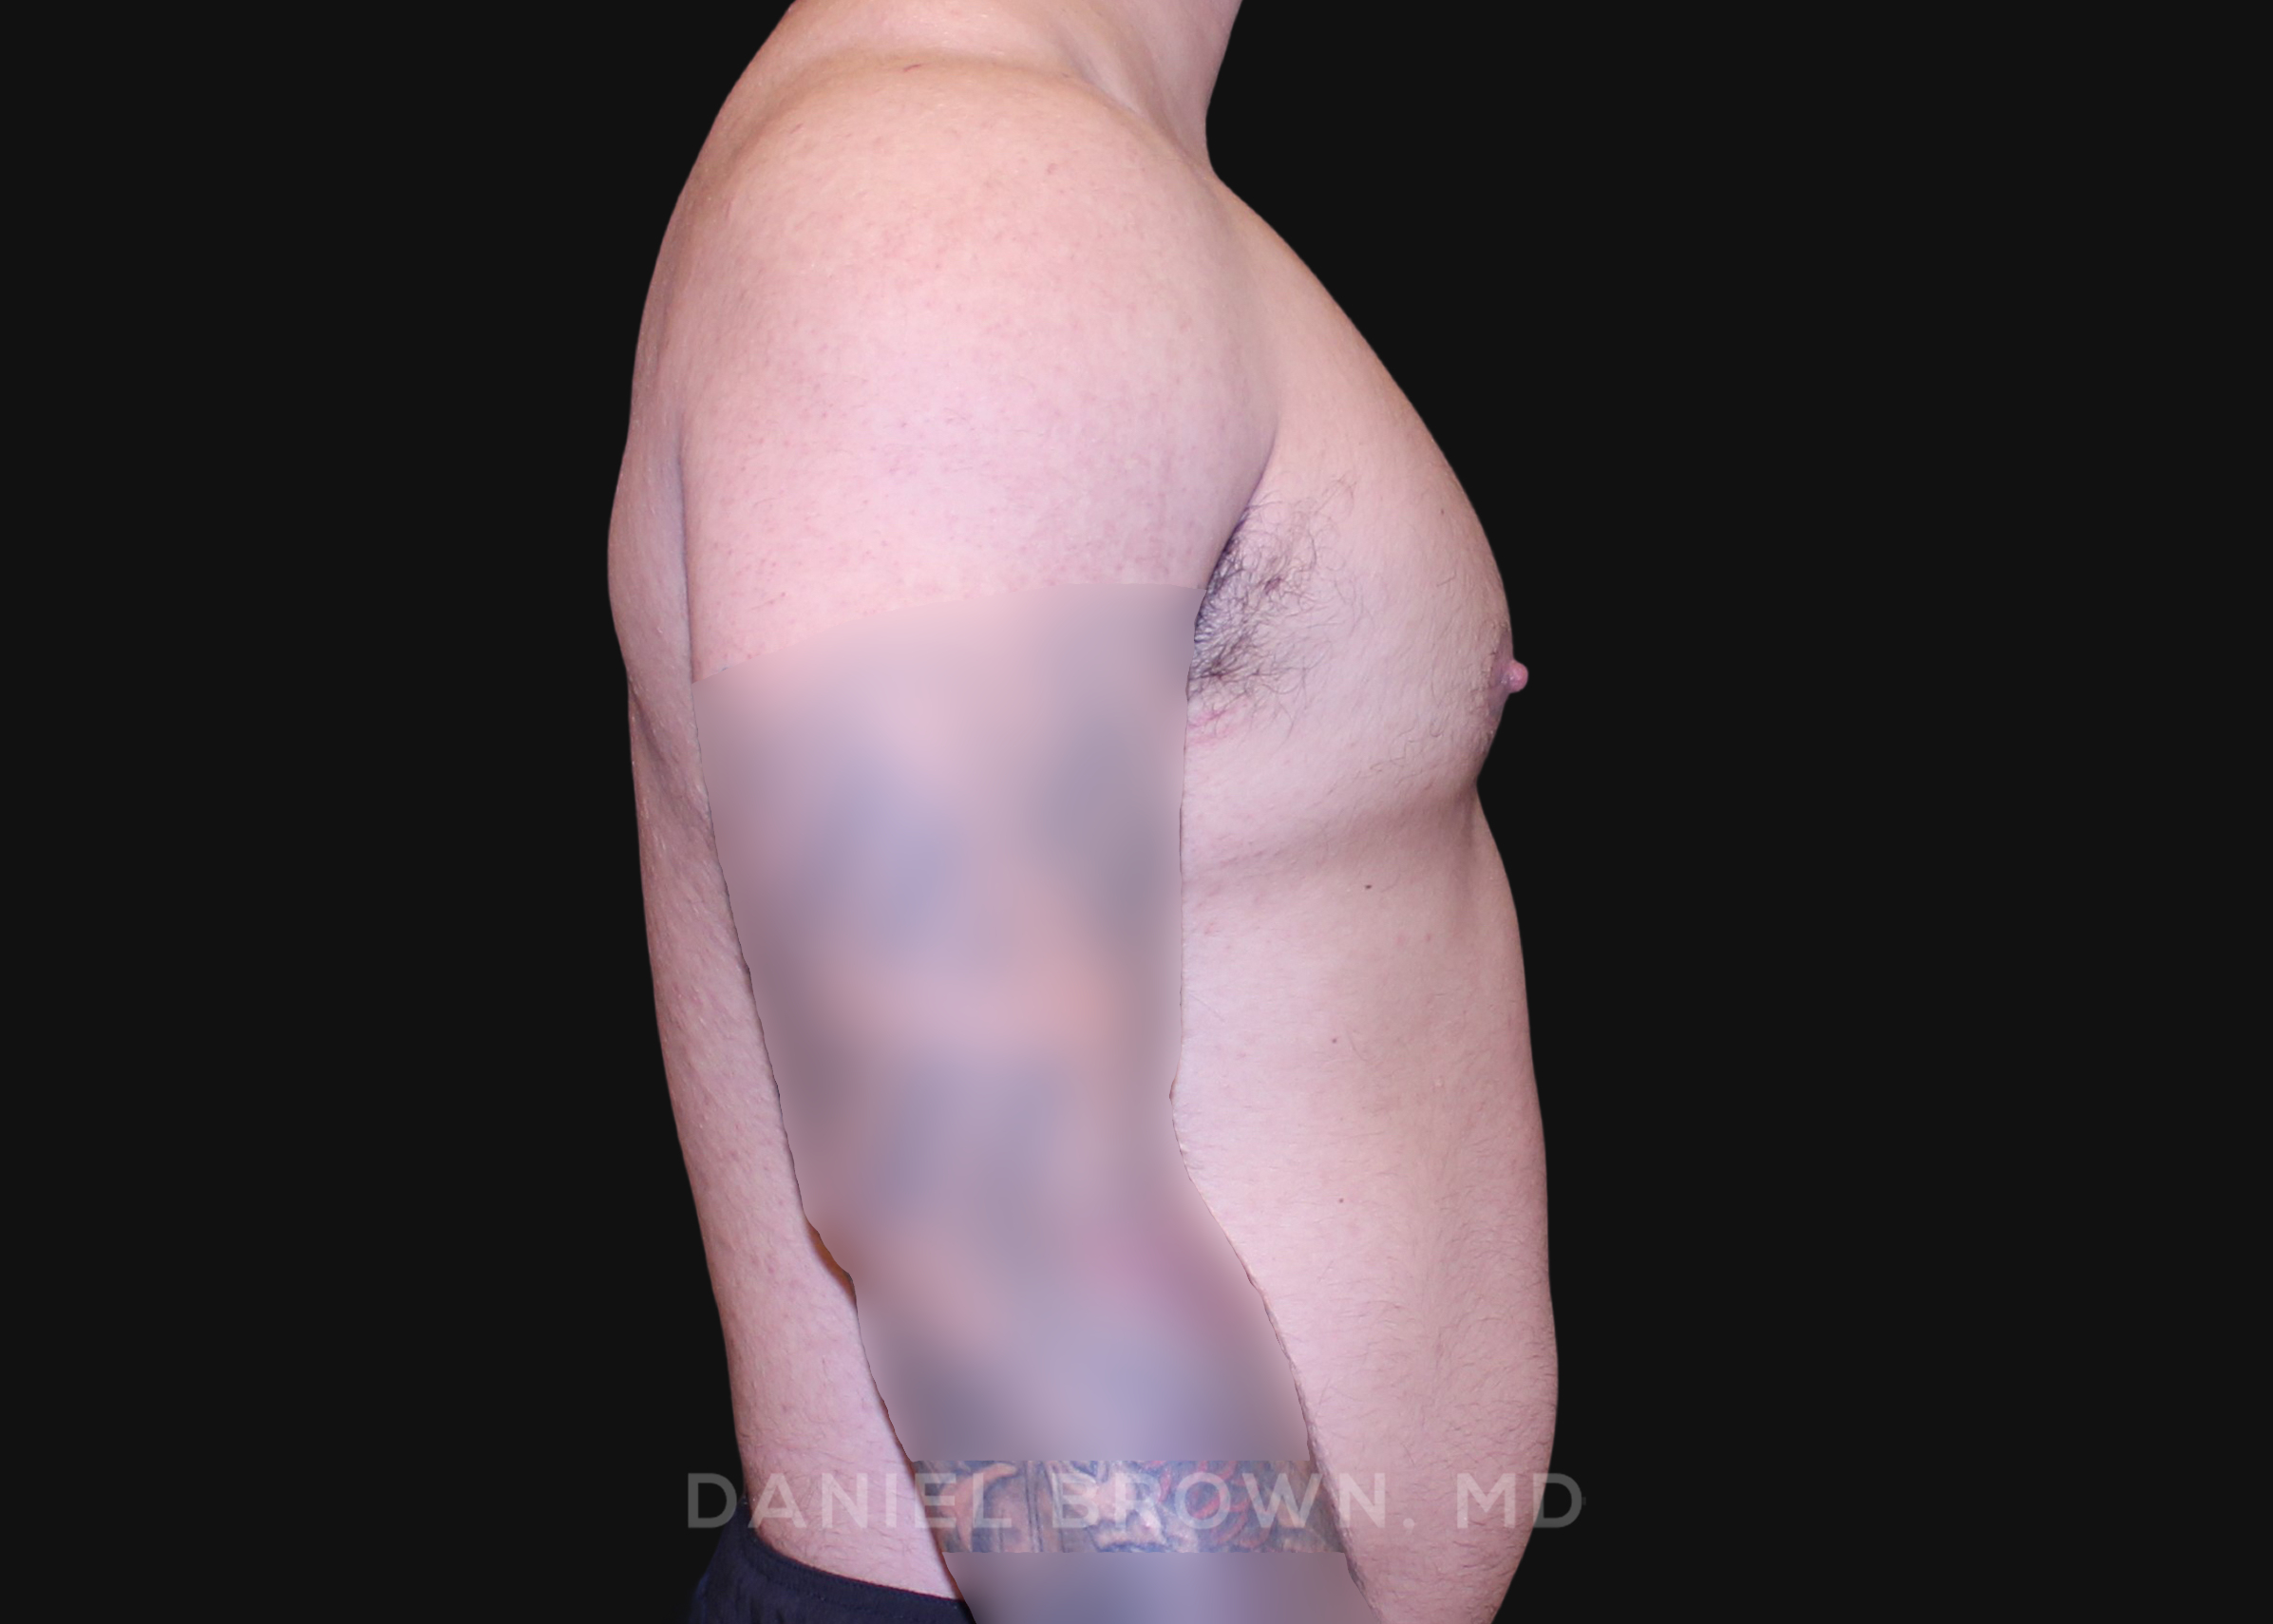 Male Breast Reduction Patient Photo - Case 2790 - after view